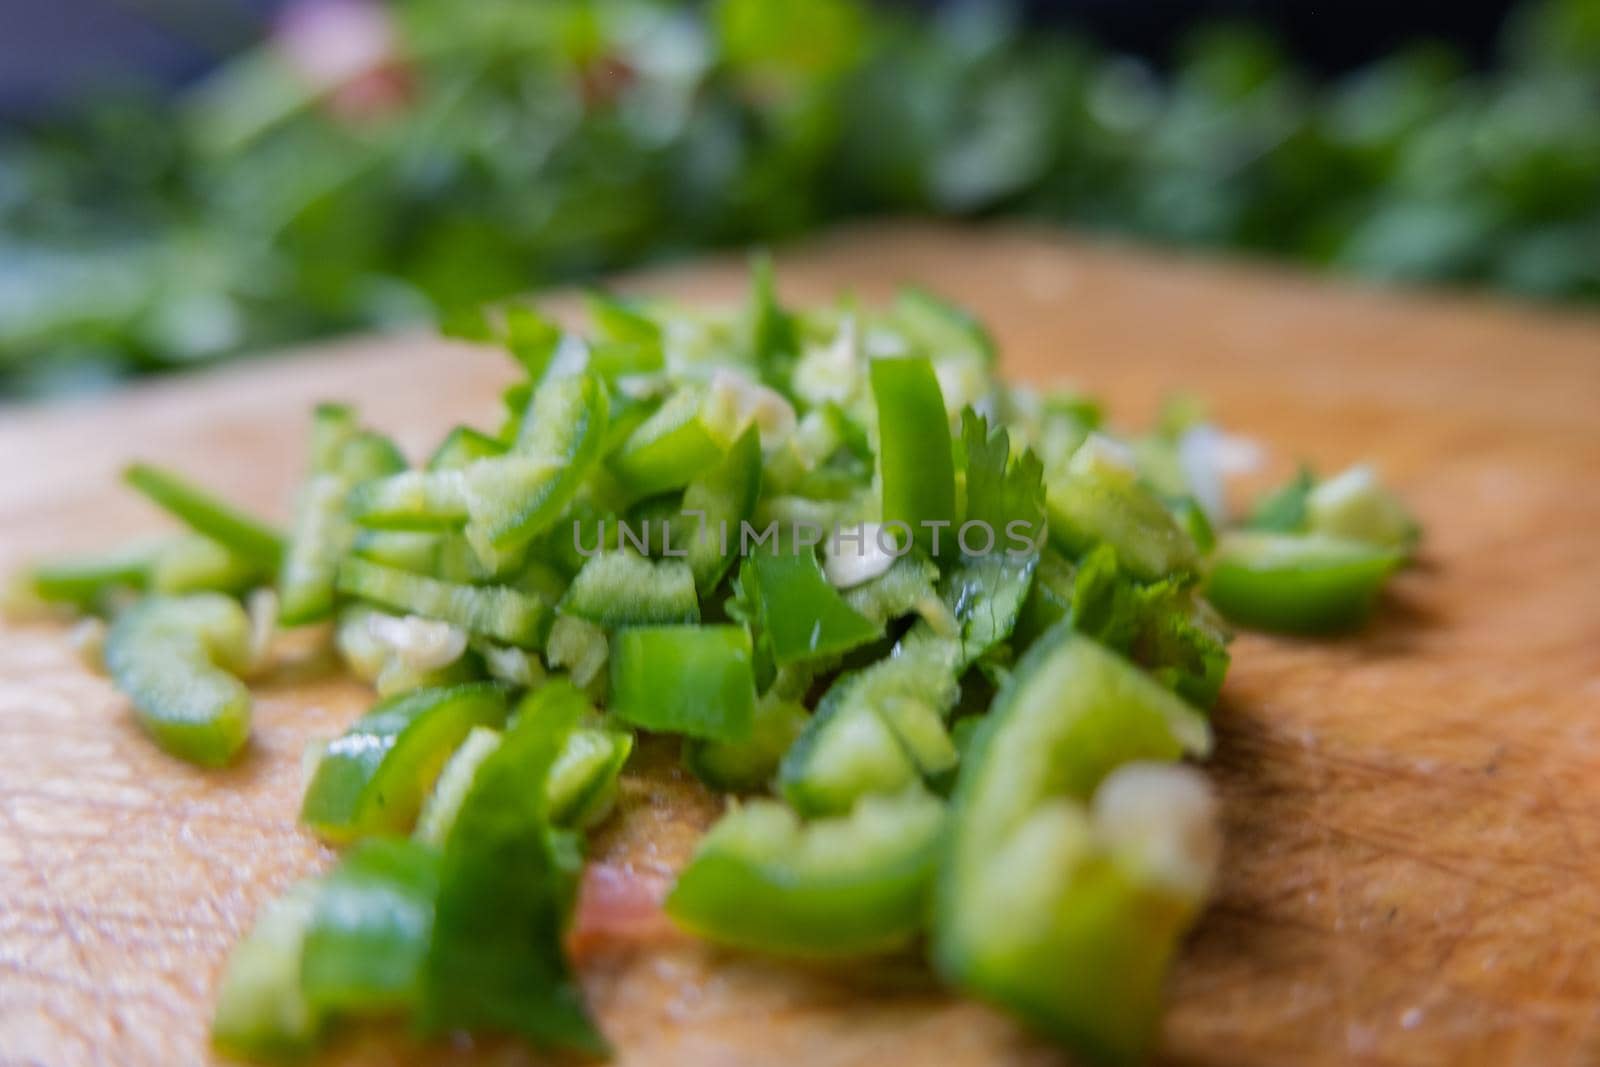 Close-up of chopped chili pepper on wooden cutting board with blurry coriander as background. Fresh green vegetables and herbs cut into pieces above wood surface. Traditional sauce preparation